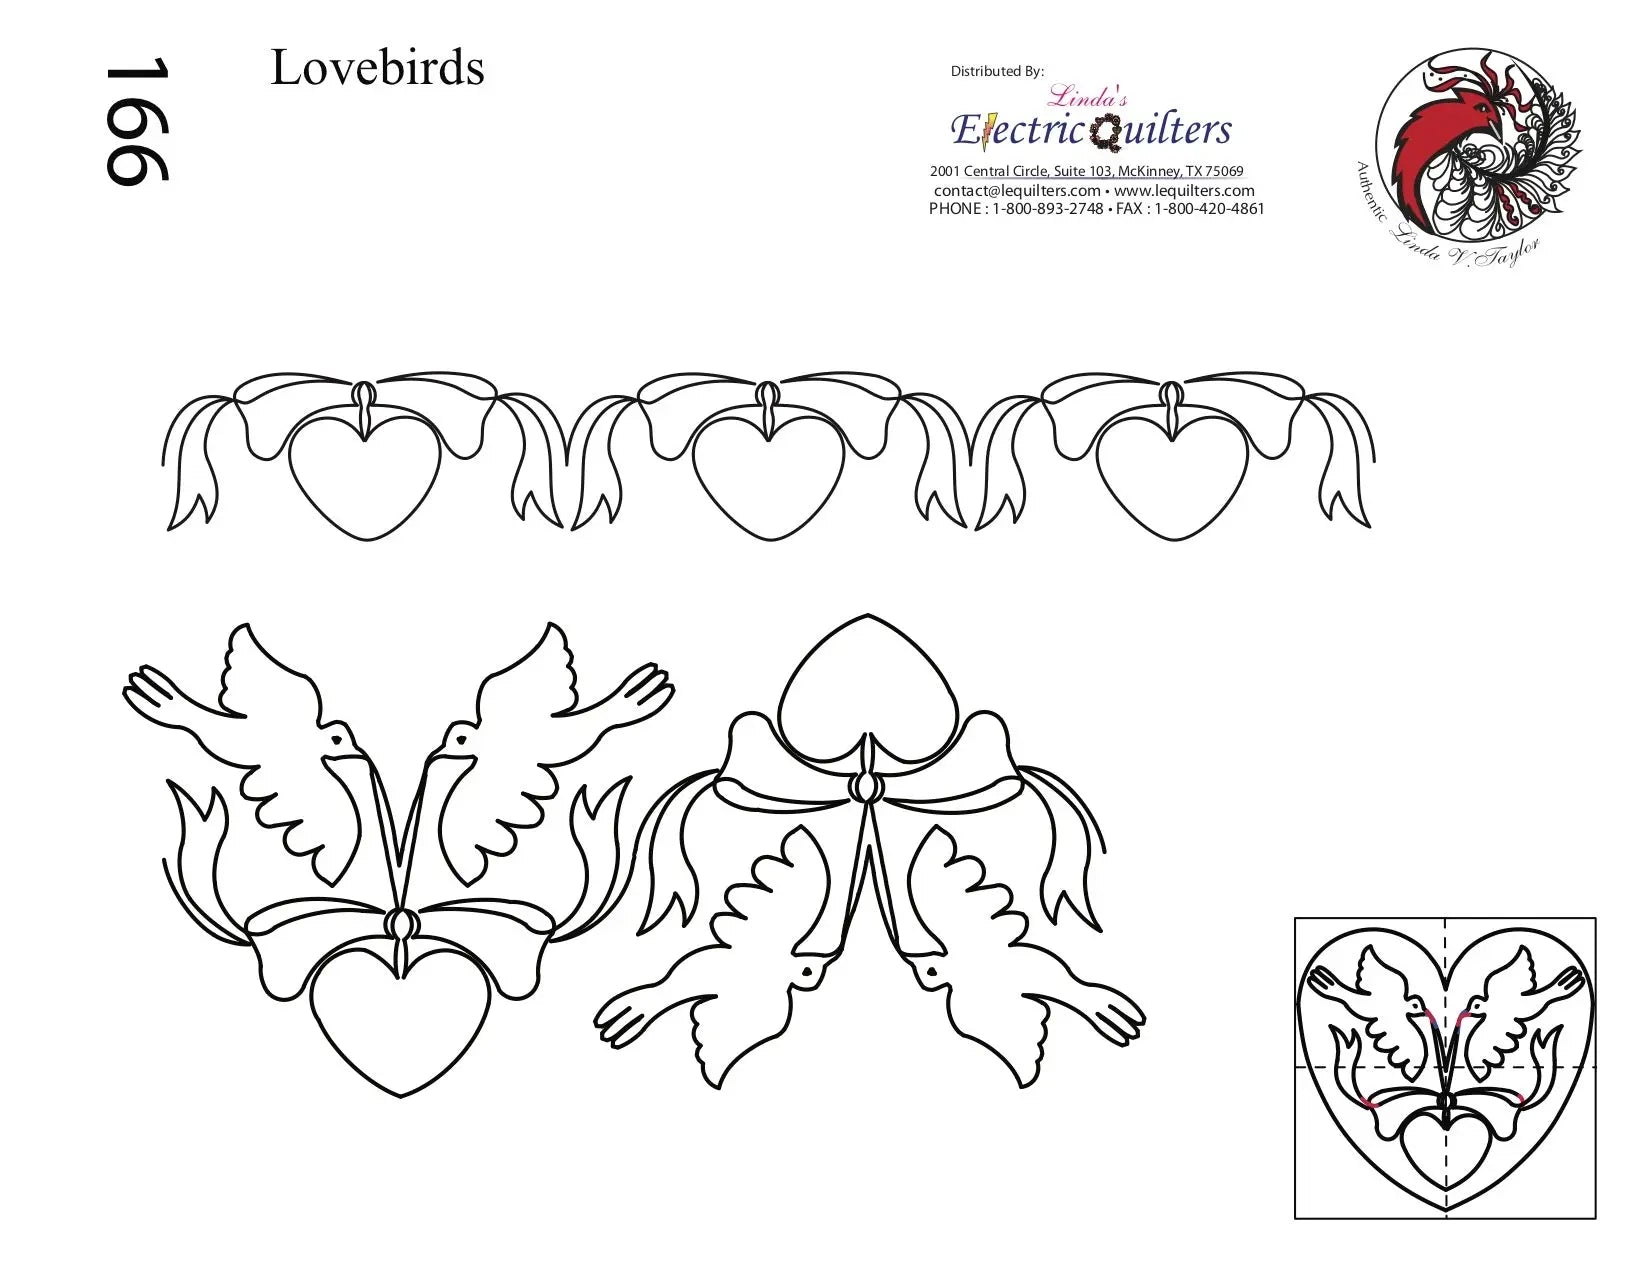 166 Lovebirds Pantograph with Blocks by Linda V. Taylor - Linda's Electric Quilters